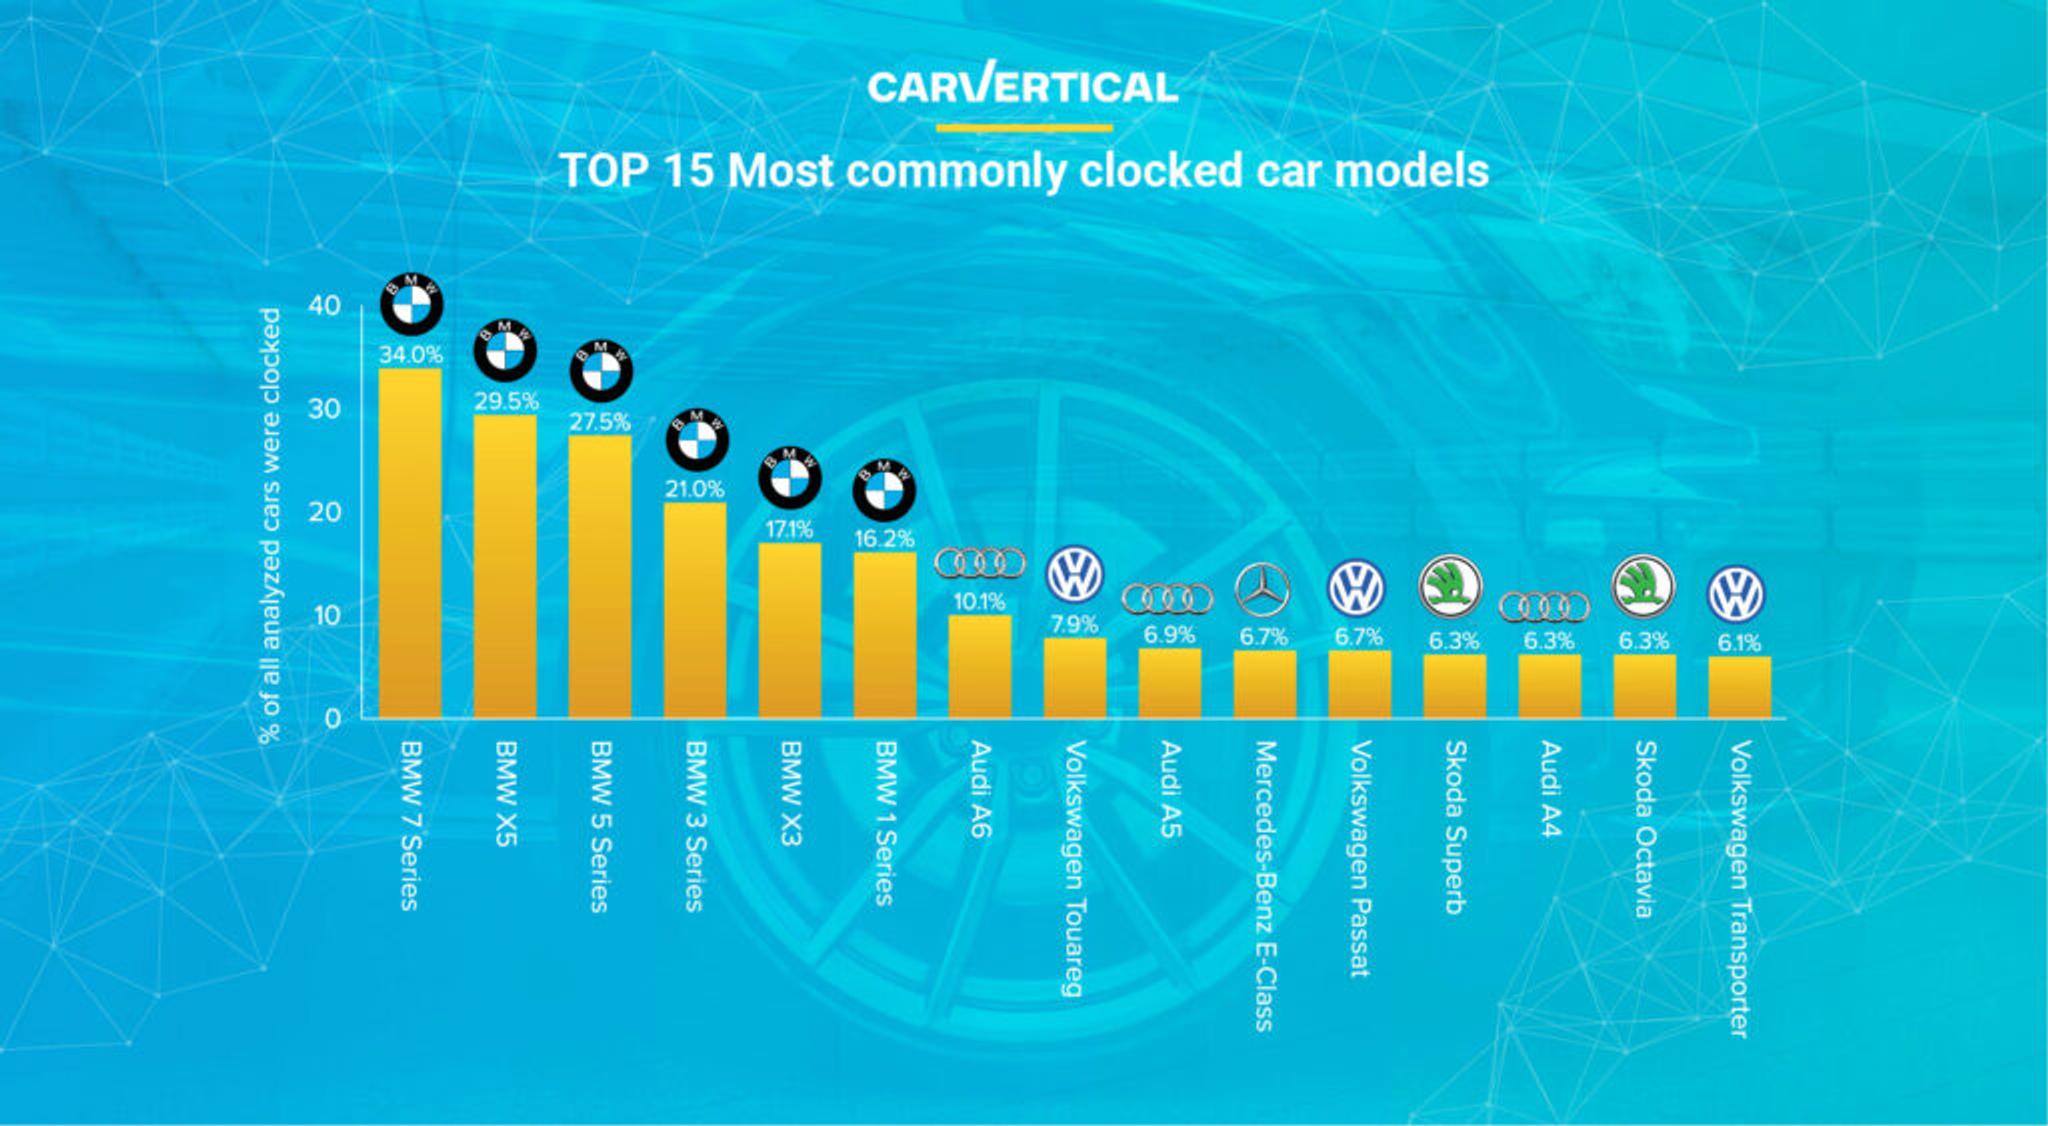 TOP 15 most commonly clocked car models